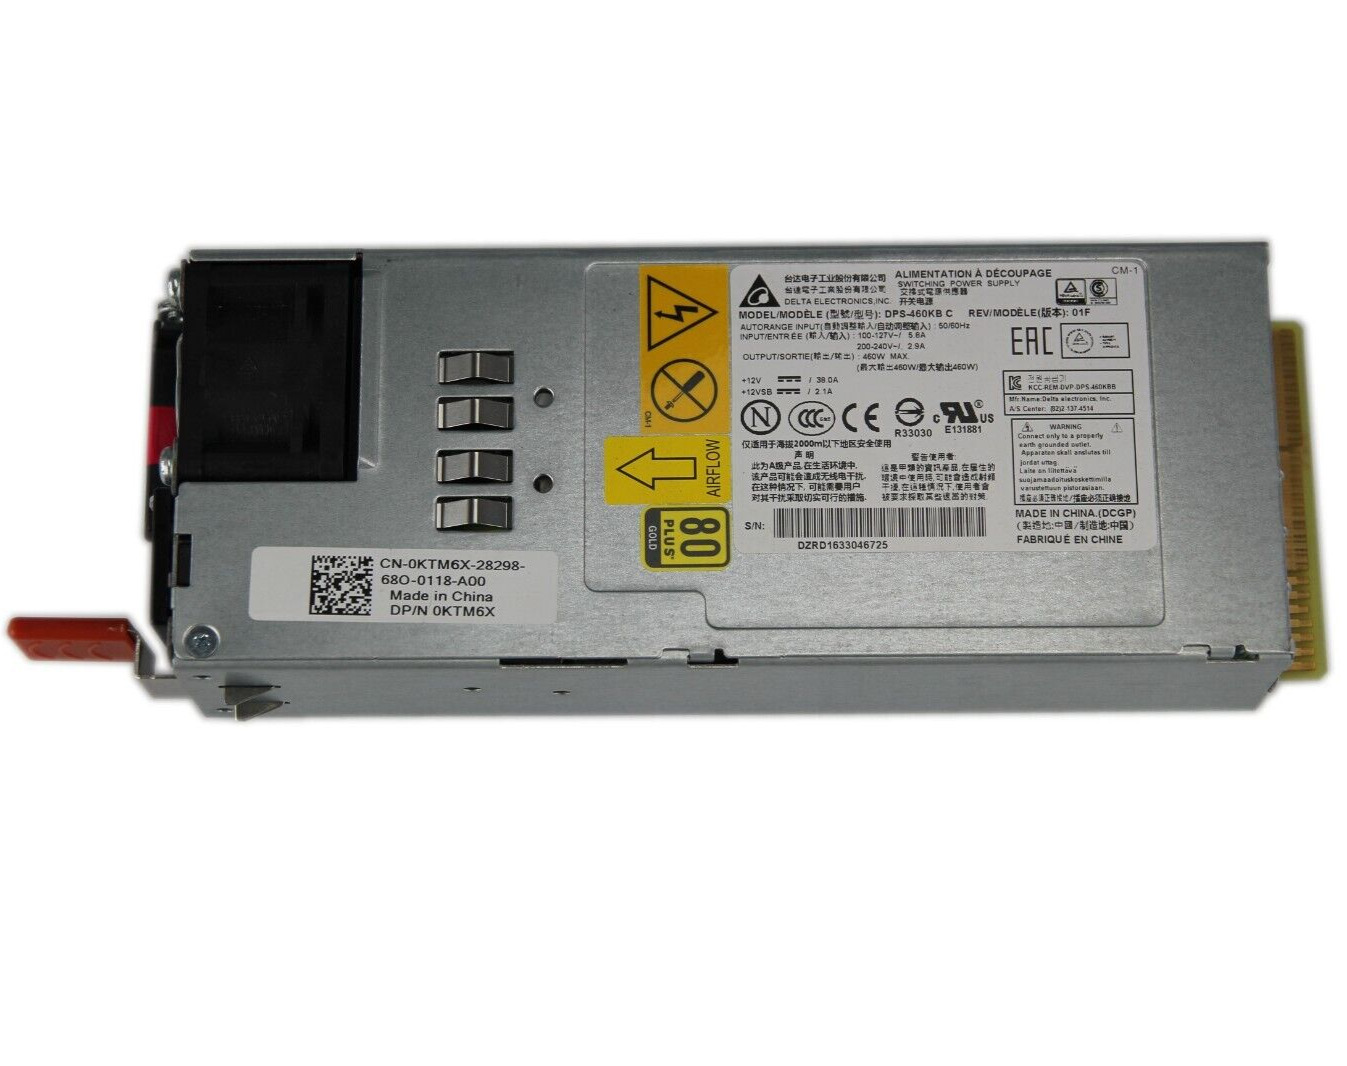 Dell  PowerConnect N4000 N4064 S4128 S4048 460W Power Supply KTM6X